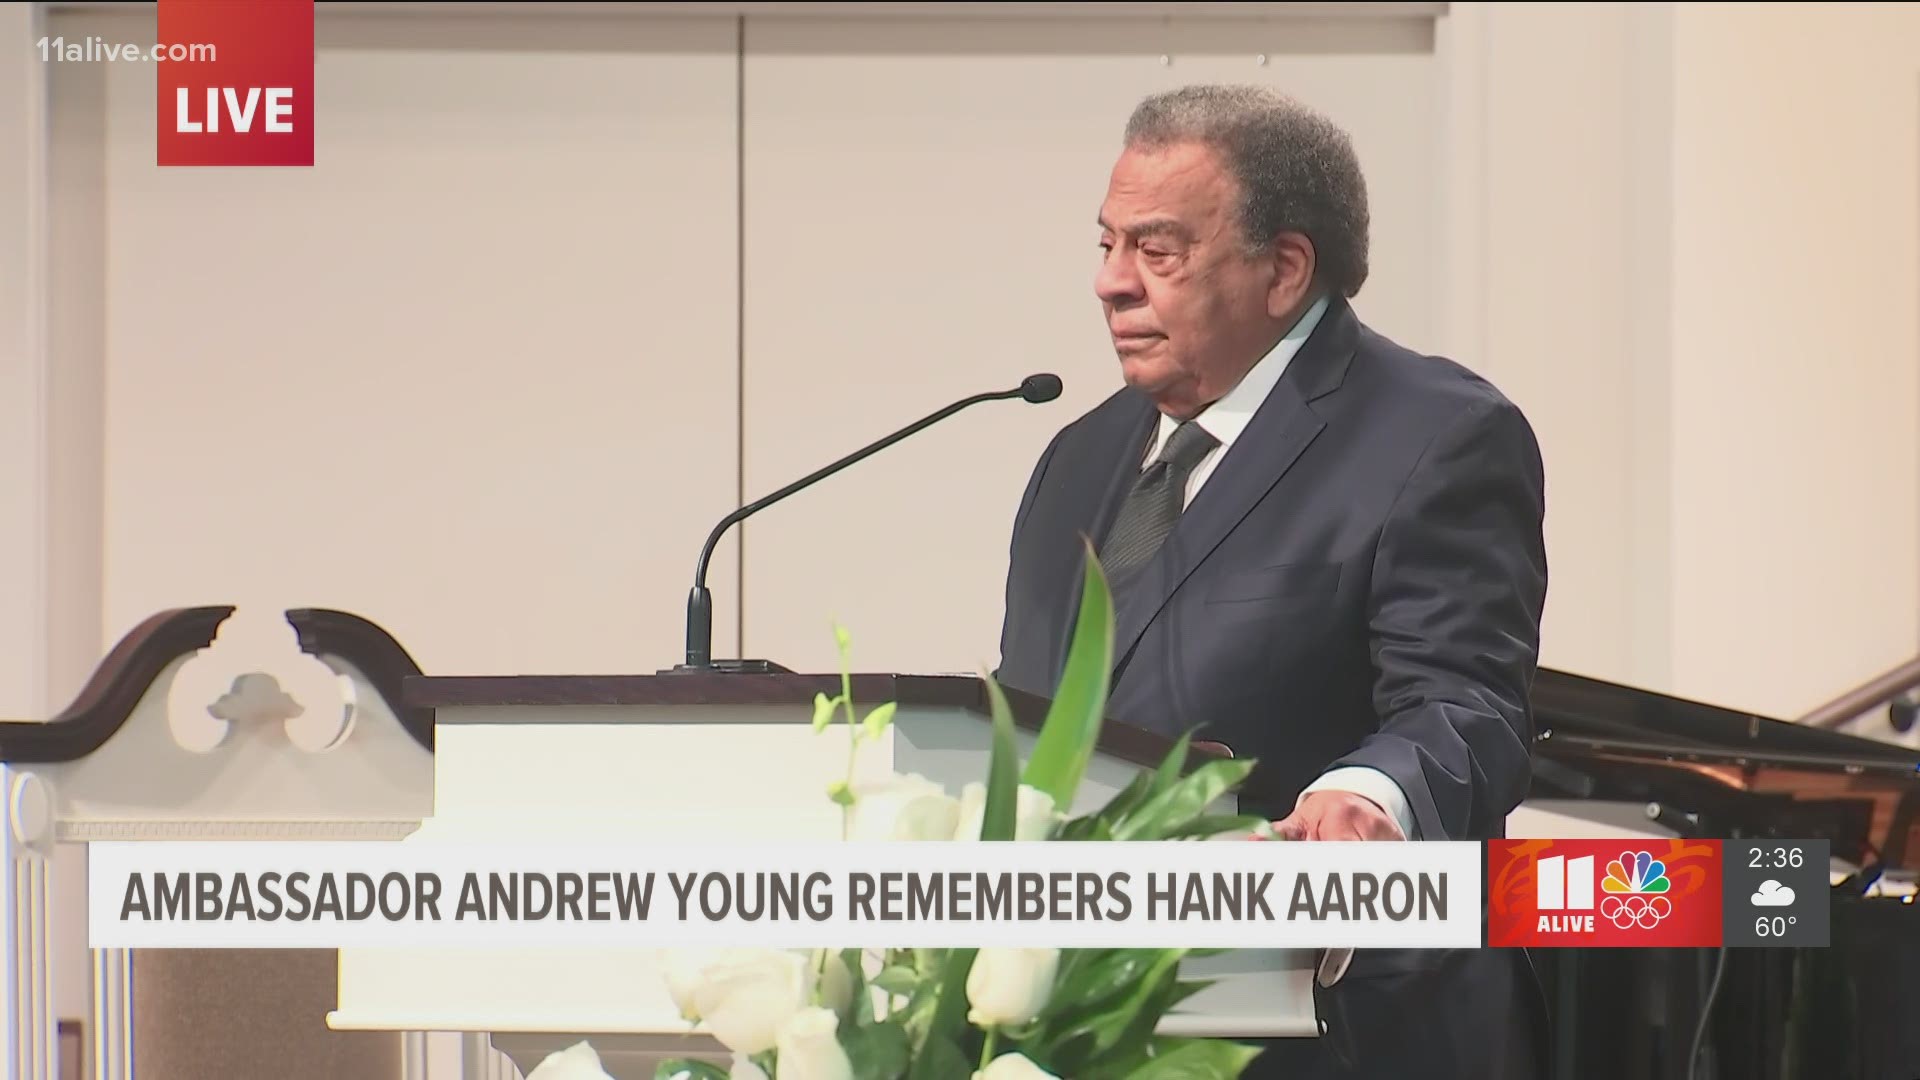 The Honorable Andrew Young, Former Ambassador to the United Nations, delivers remarks at the funeral of Henry Louis Aaron at Friendship Baptist Church in Atlanta.